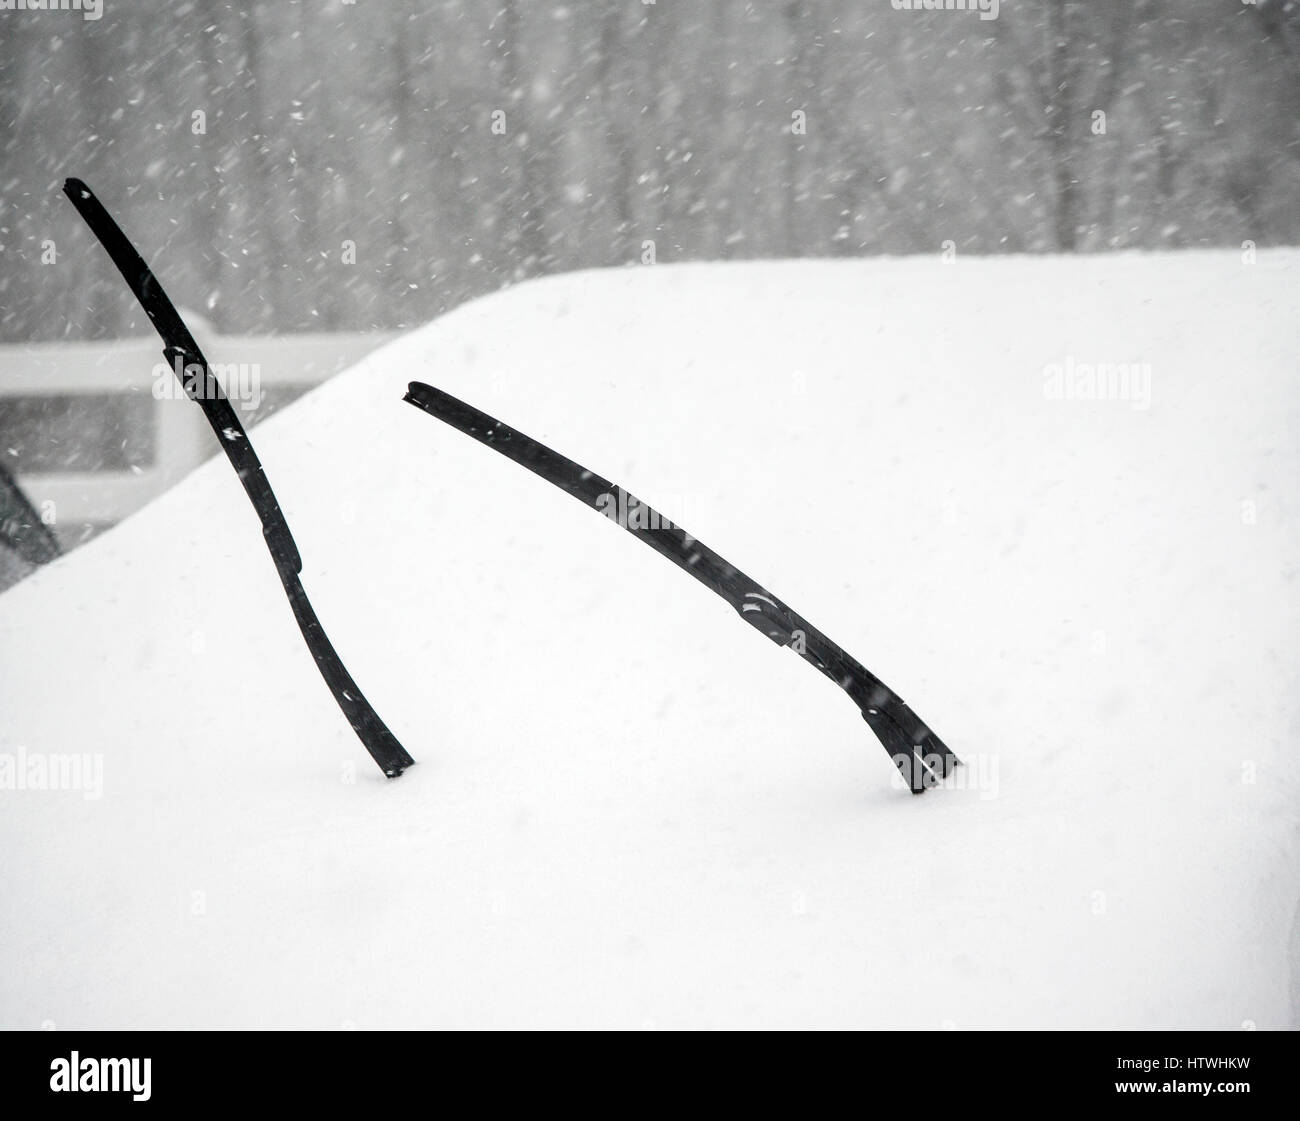 Windshield wipers on a car during a snow storm Stock Photo